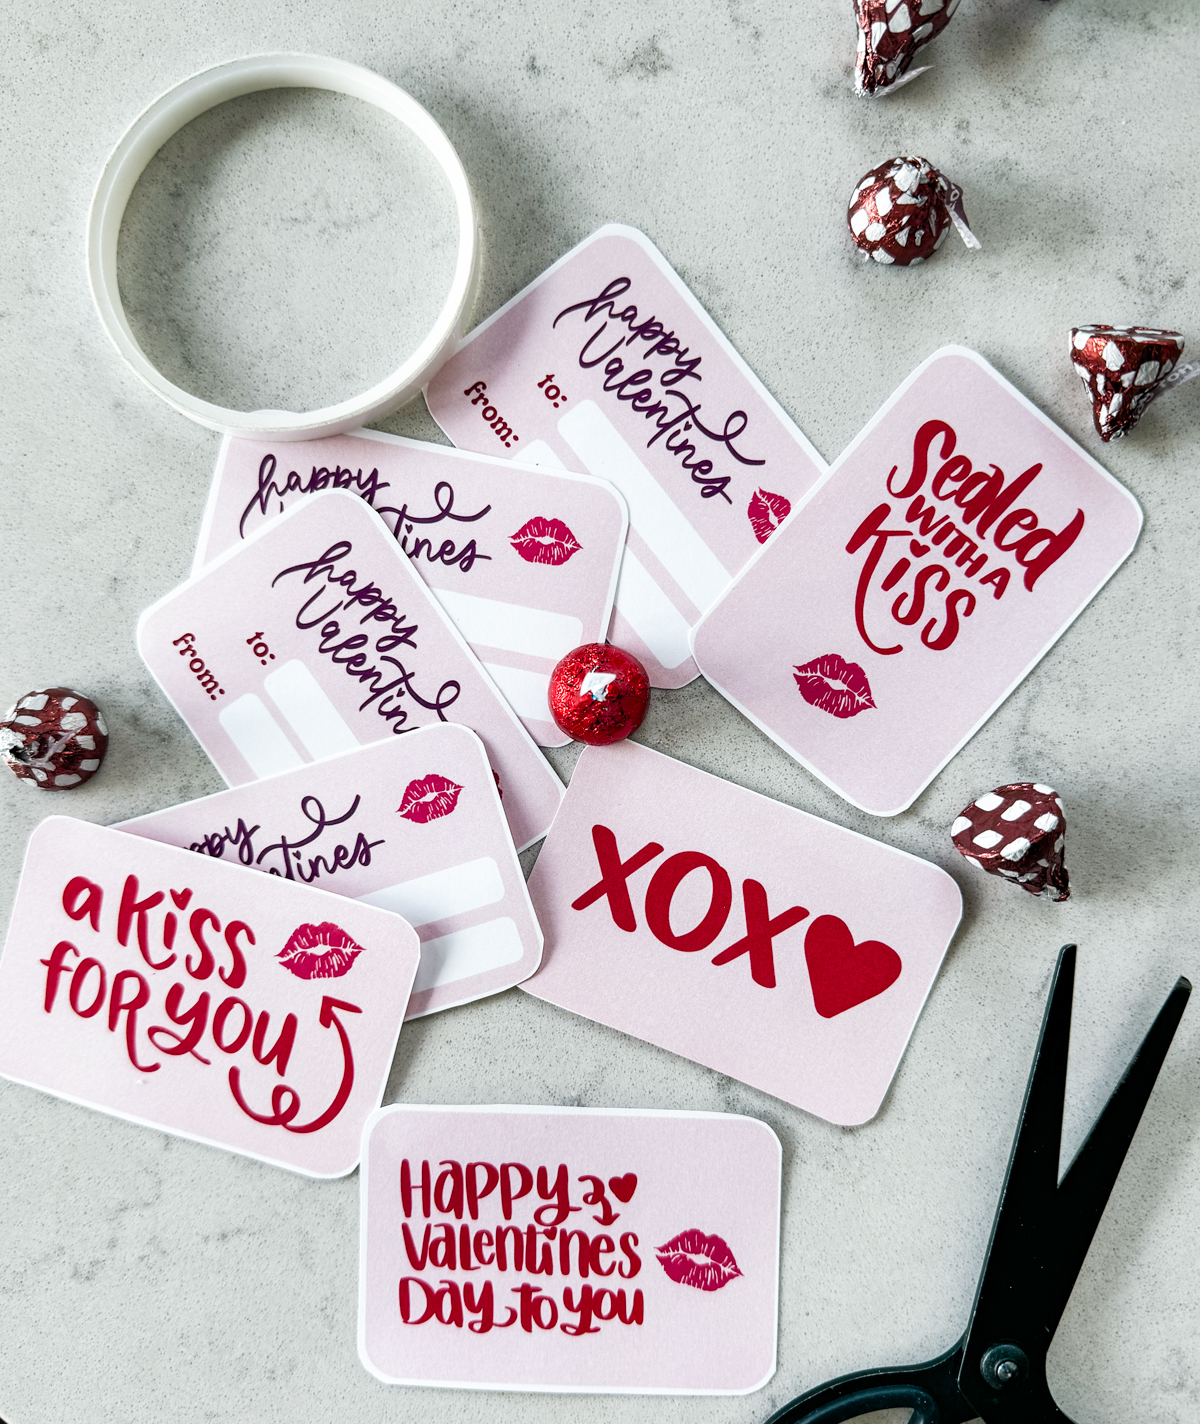 image of printable valentine cards cut to size and styled with scissors, chocolate kisses and double sided tape, valentines cards read: a kiss for you, xoxo, happy valentines day to you, sealed with a kiss